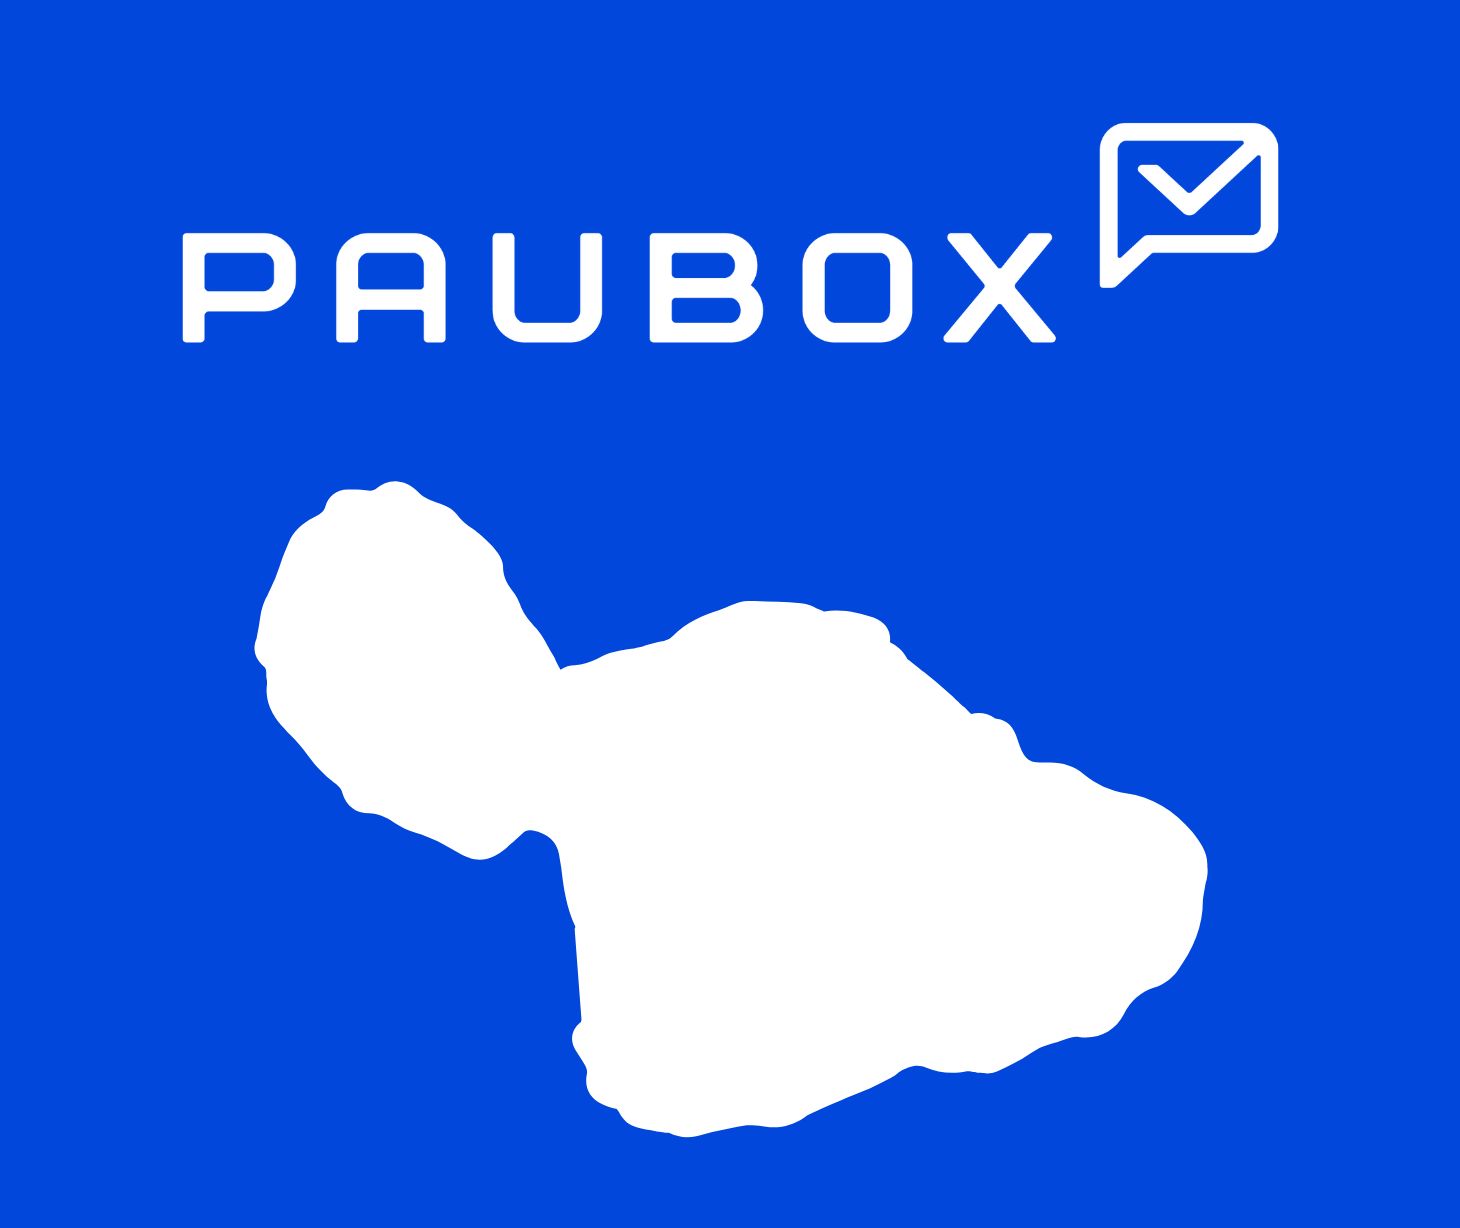 Goal achieved: Paubox matching donation program for Maui wildfires